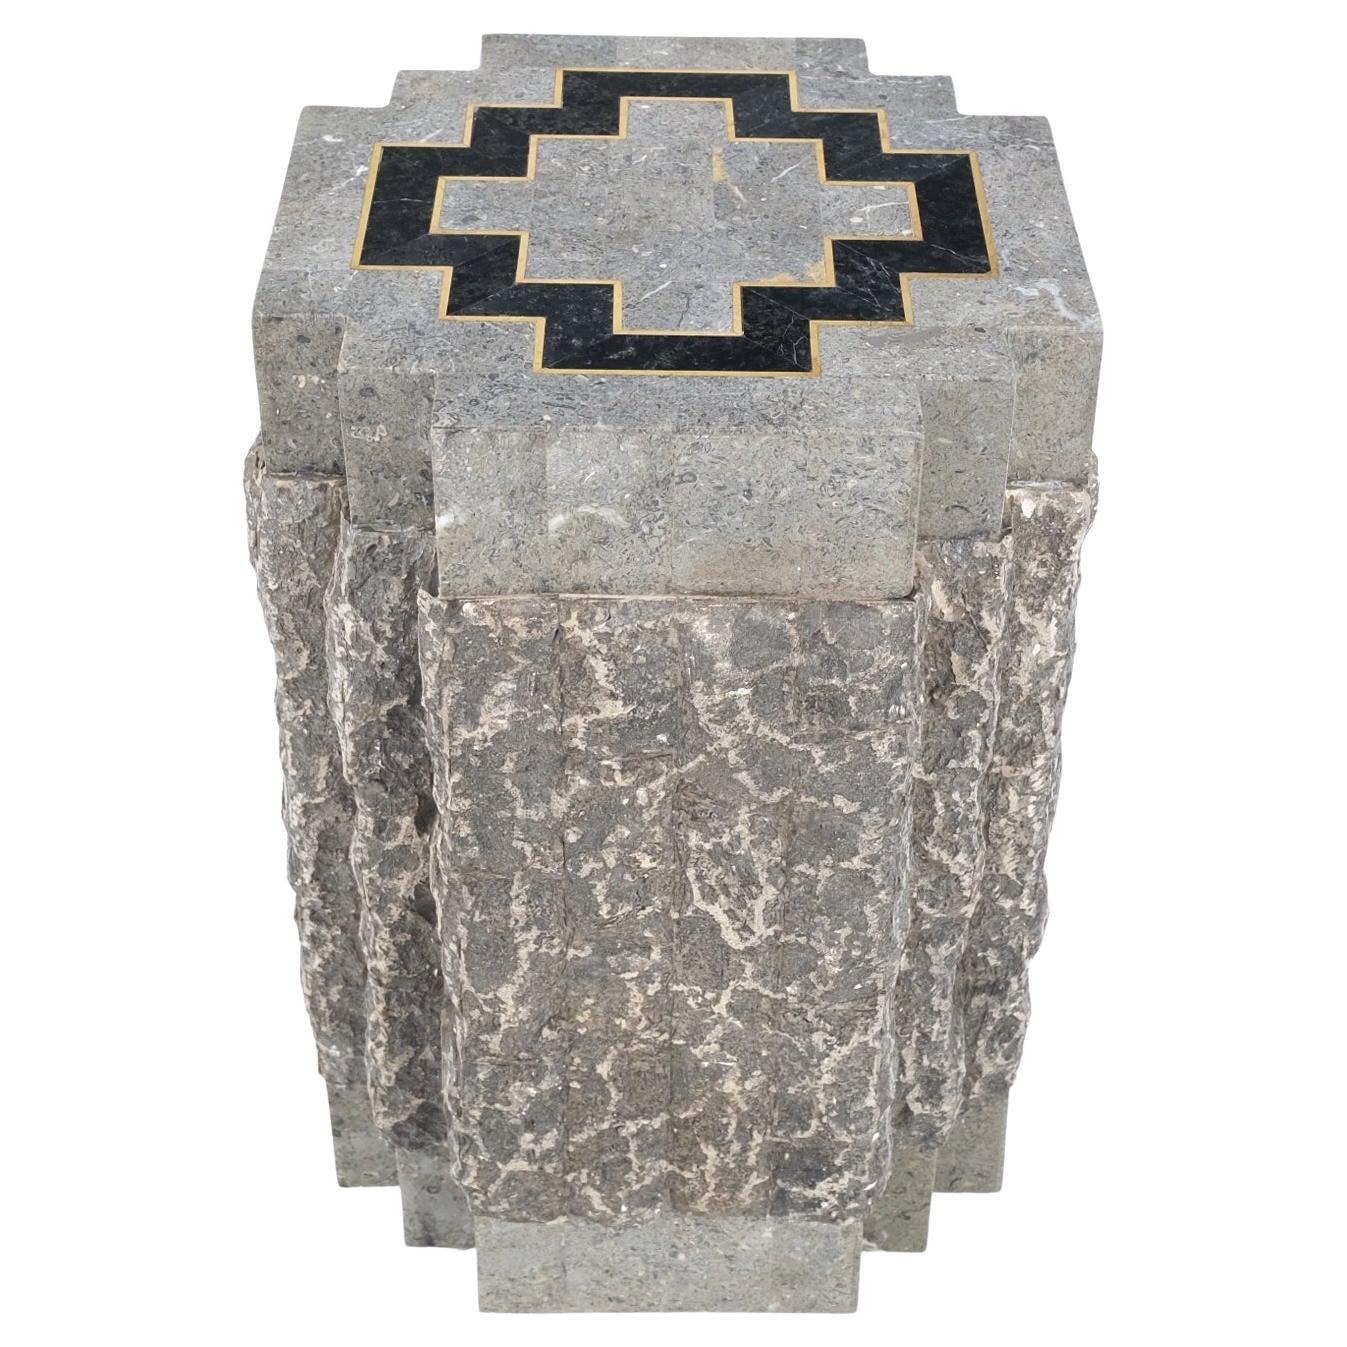 Tessellated Stone Brass Inlay Square Pedestal Stand End Table Black & Grey Mint For Sale